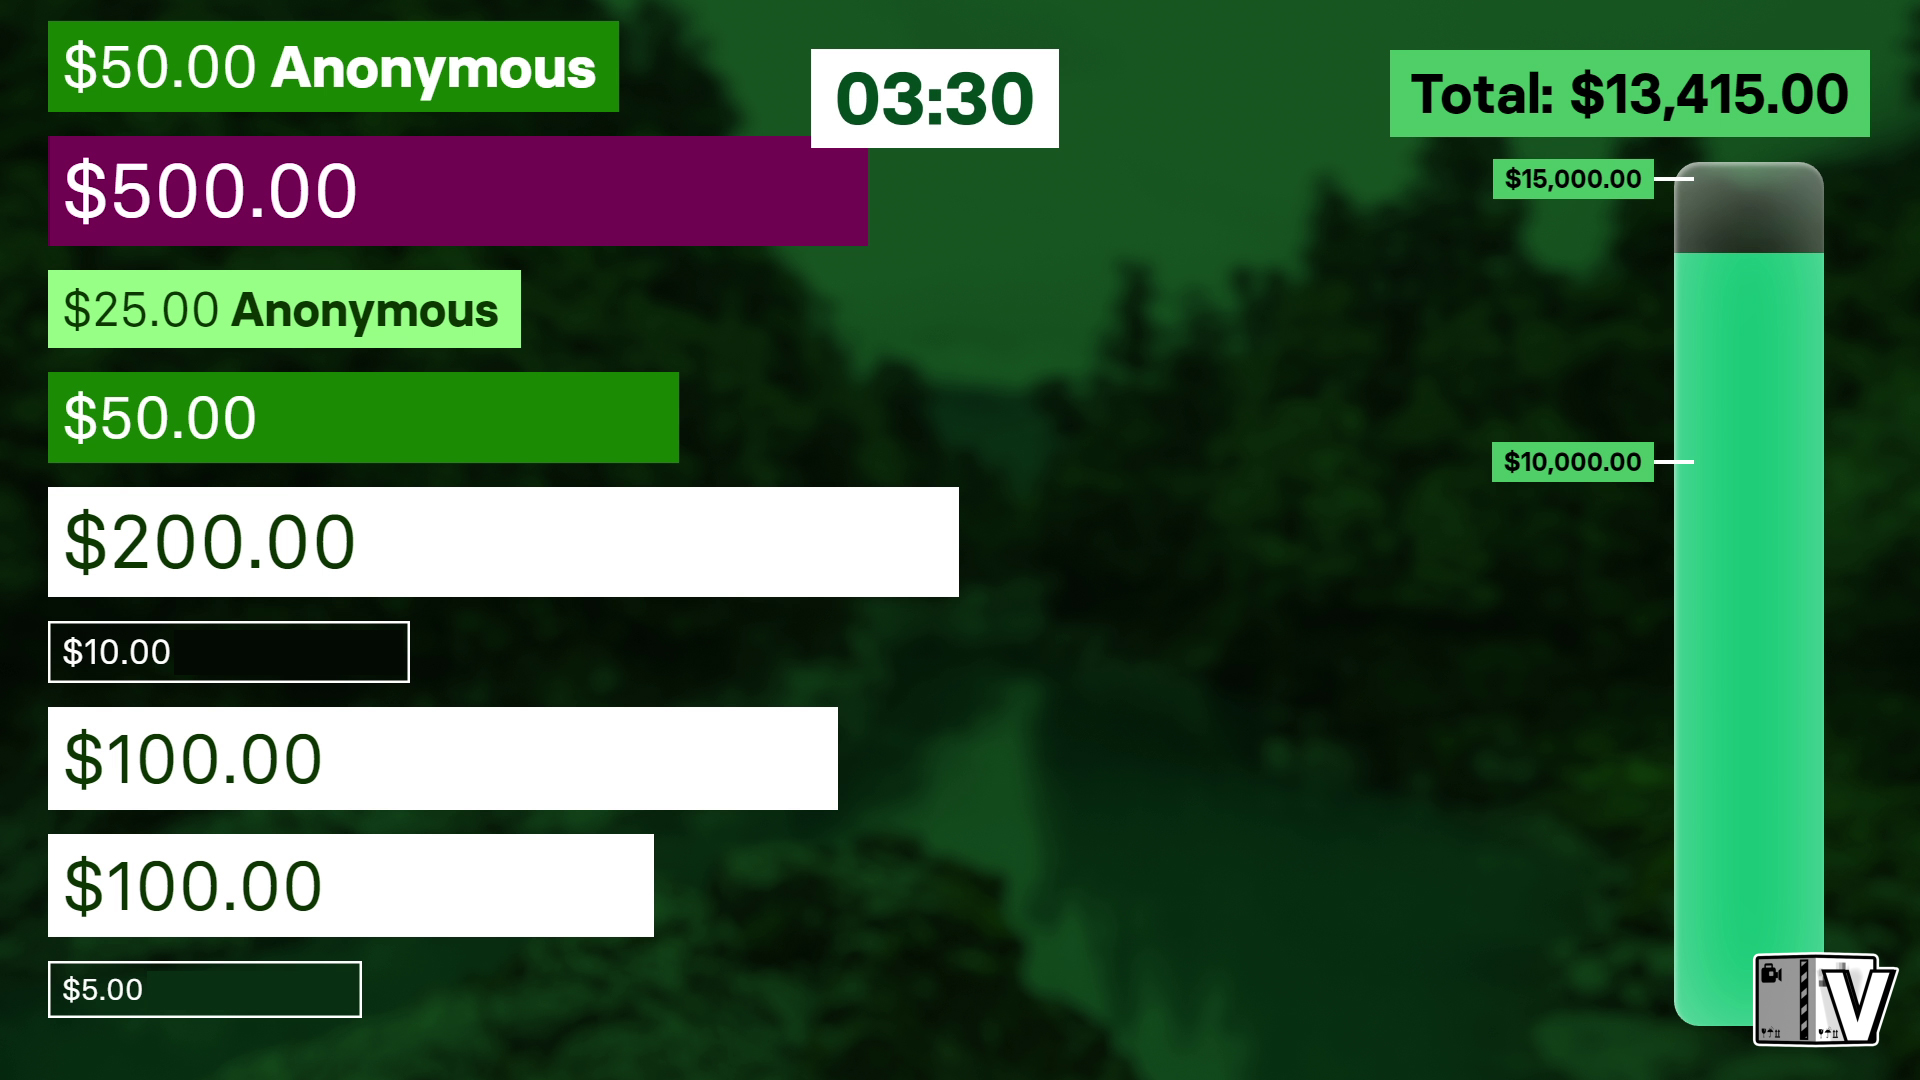 A screenshot of a live ticker showing donations/pledges coming in, and a thermometer showing progress towards a goal